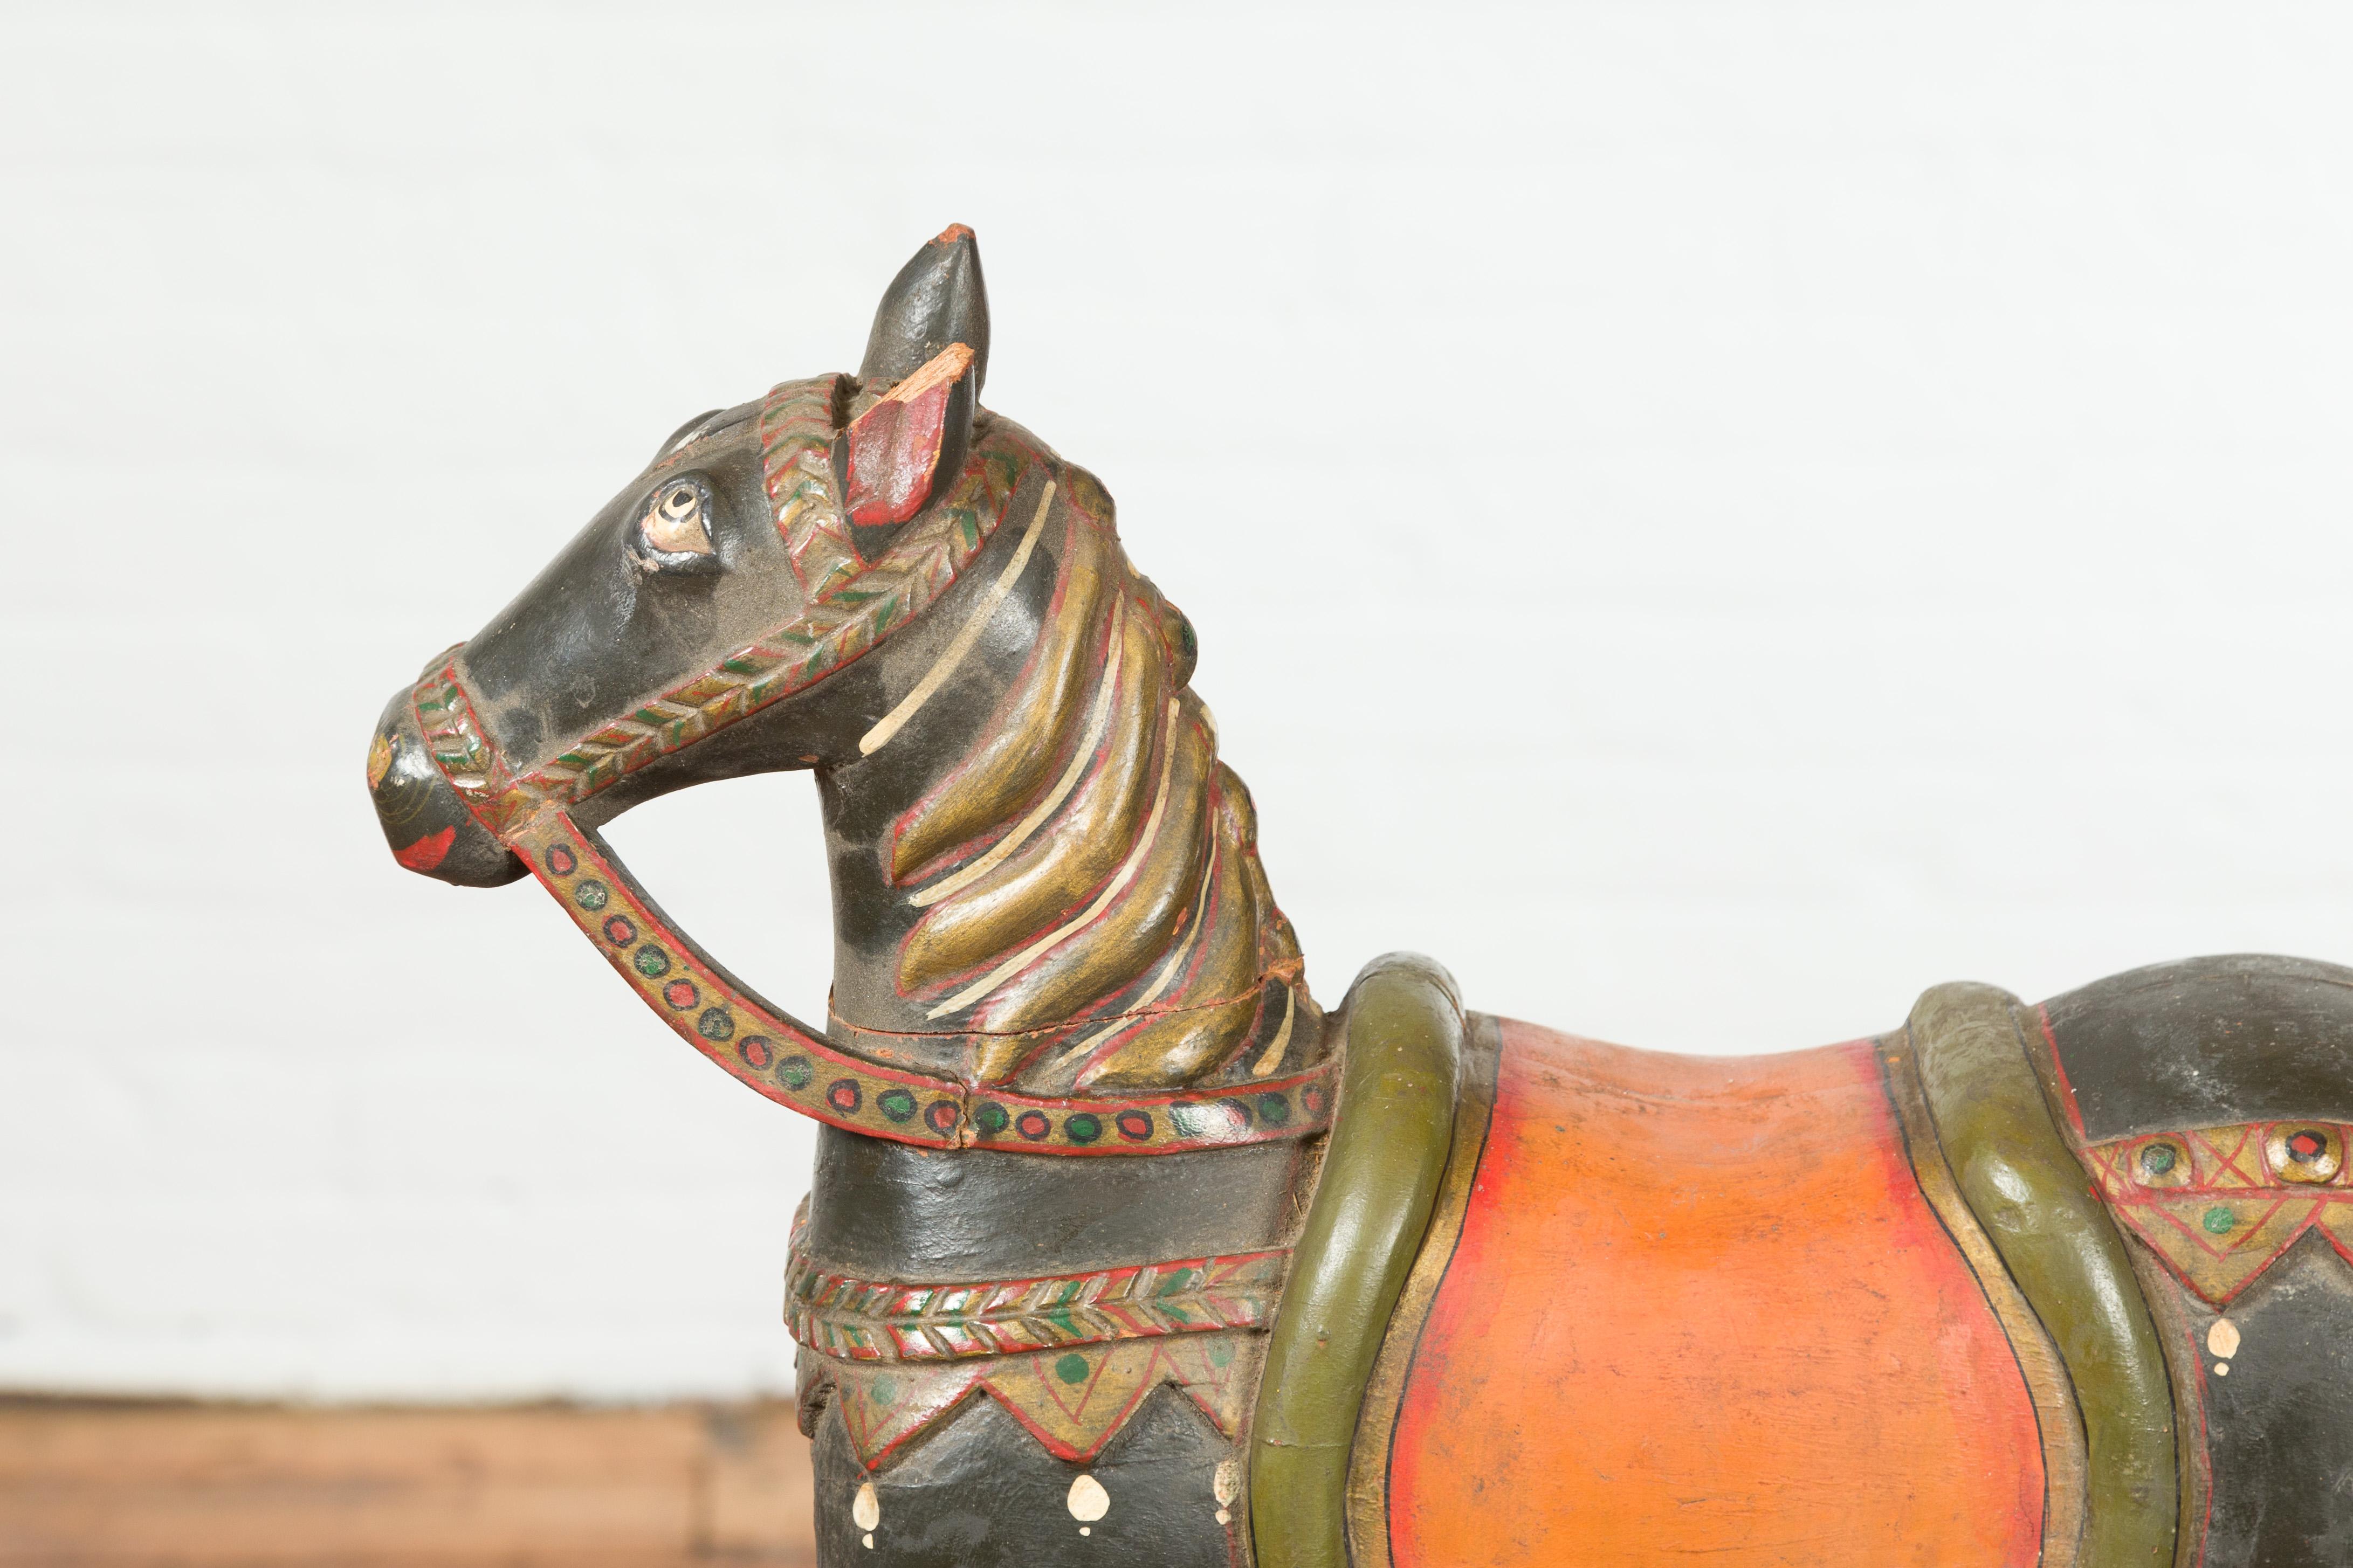 Ceramic Antique Indian Mughal Horse on Wheels Sculpture with Polychrome Finish